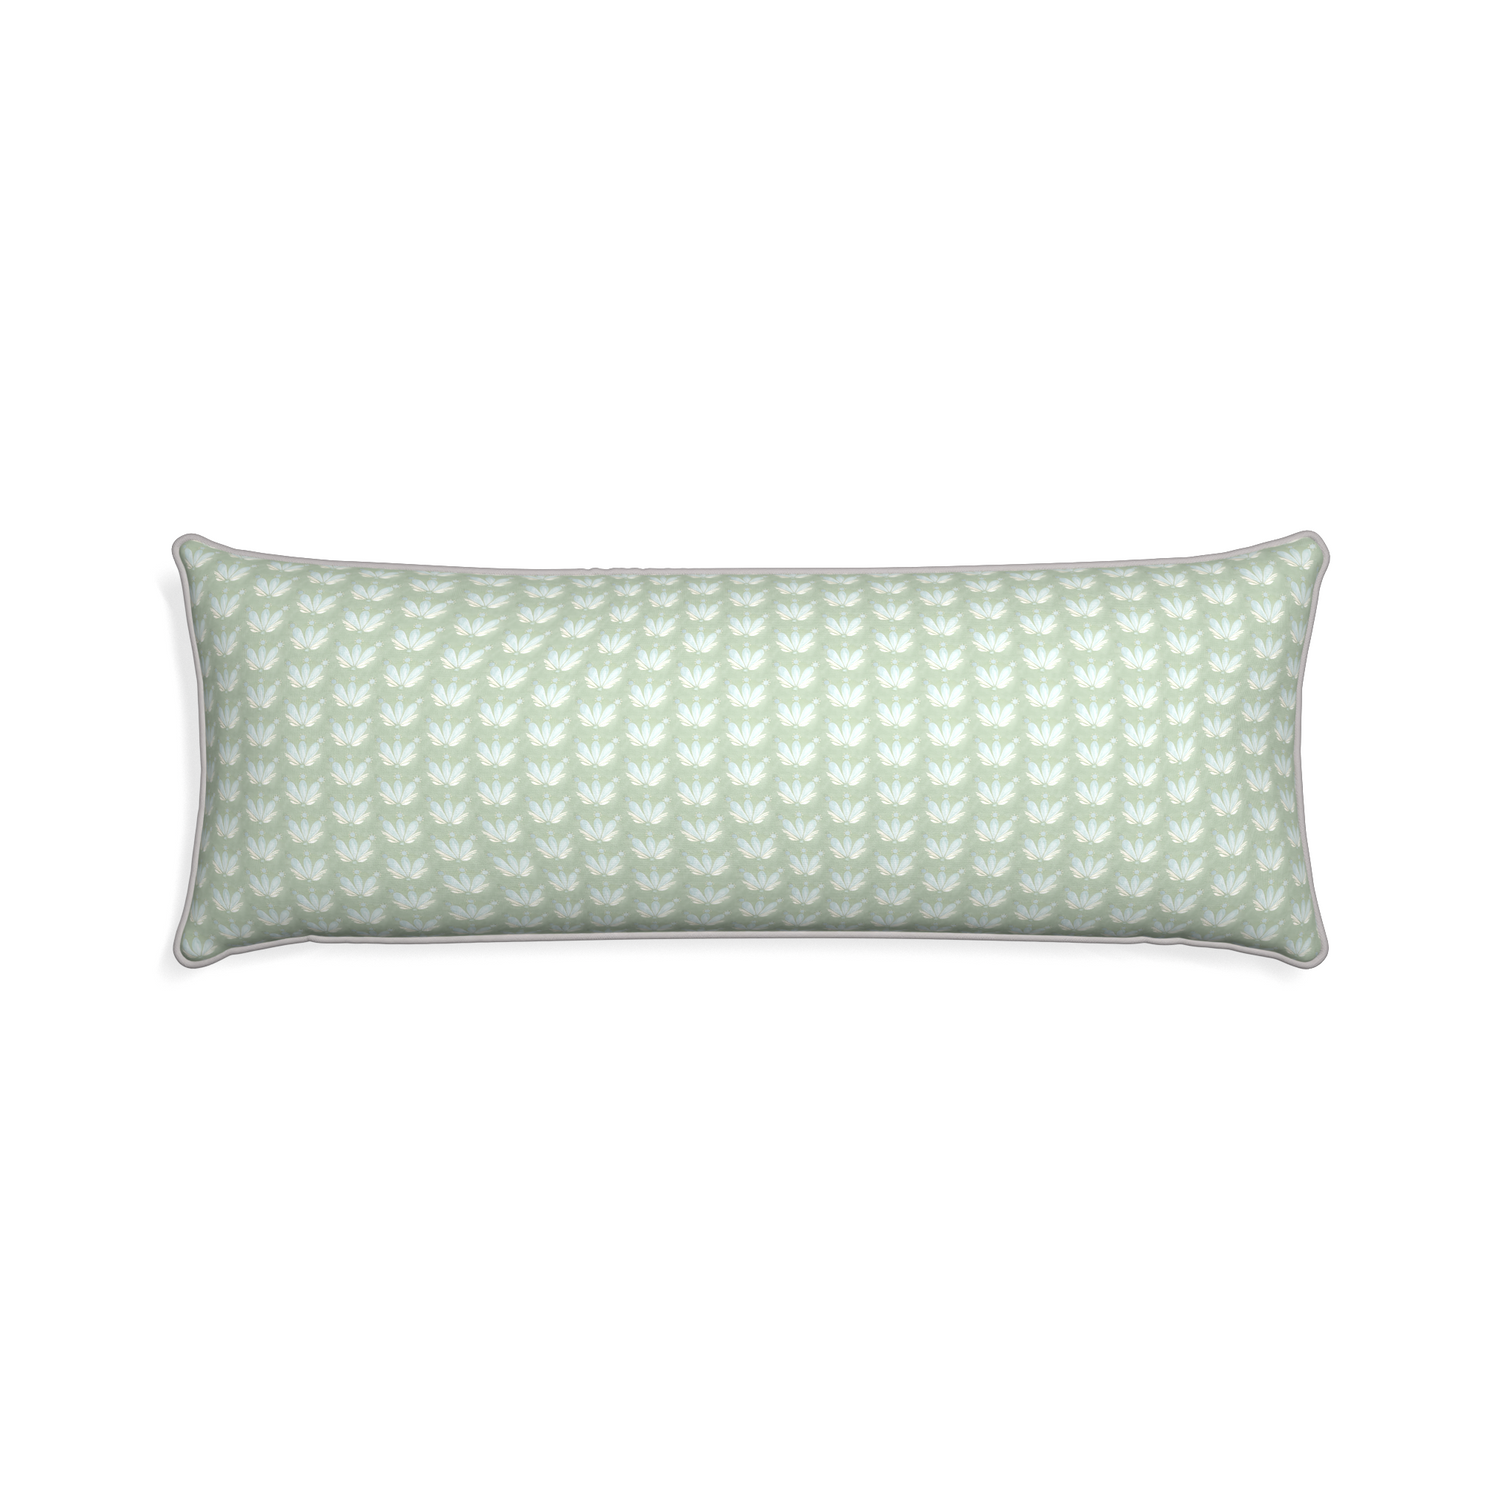 Xl-lumbar serena sea salt custom blue & green floral drop repeatpillow with pebble piping on white background